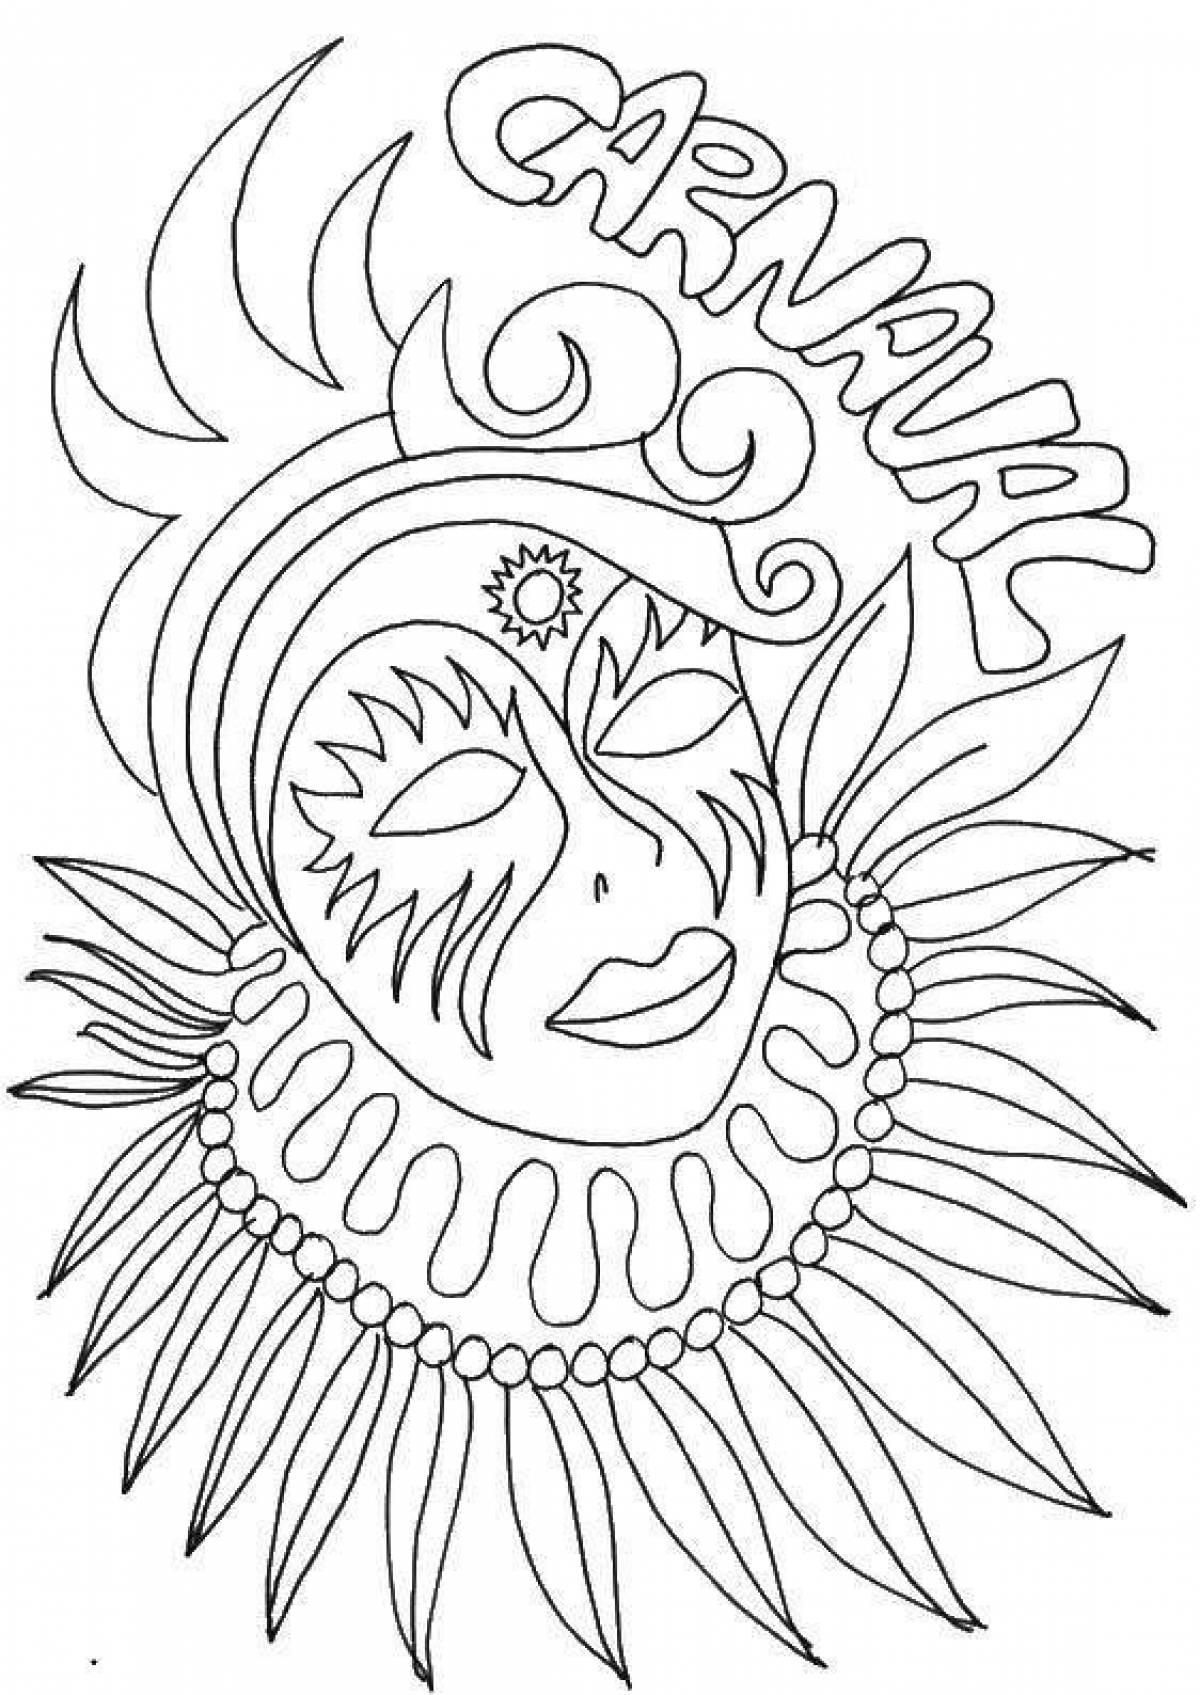 Animated carnival coloring book